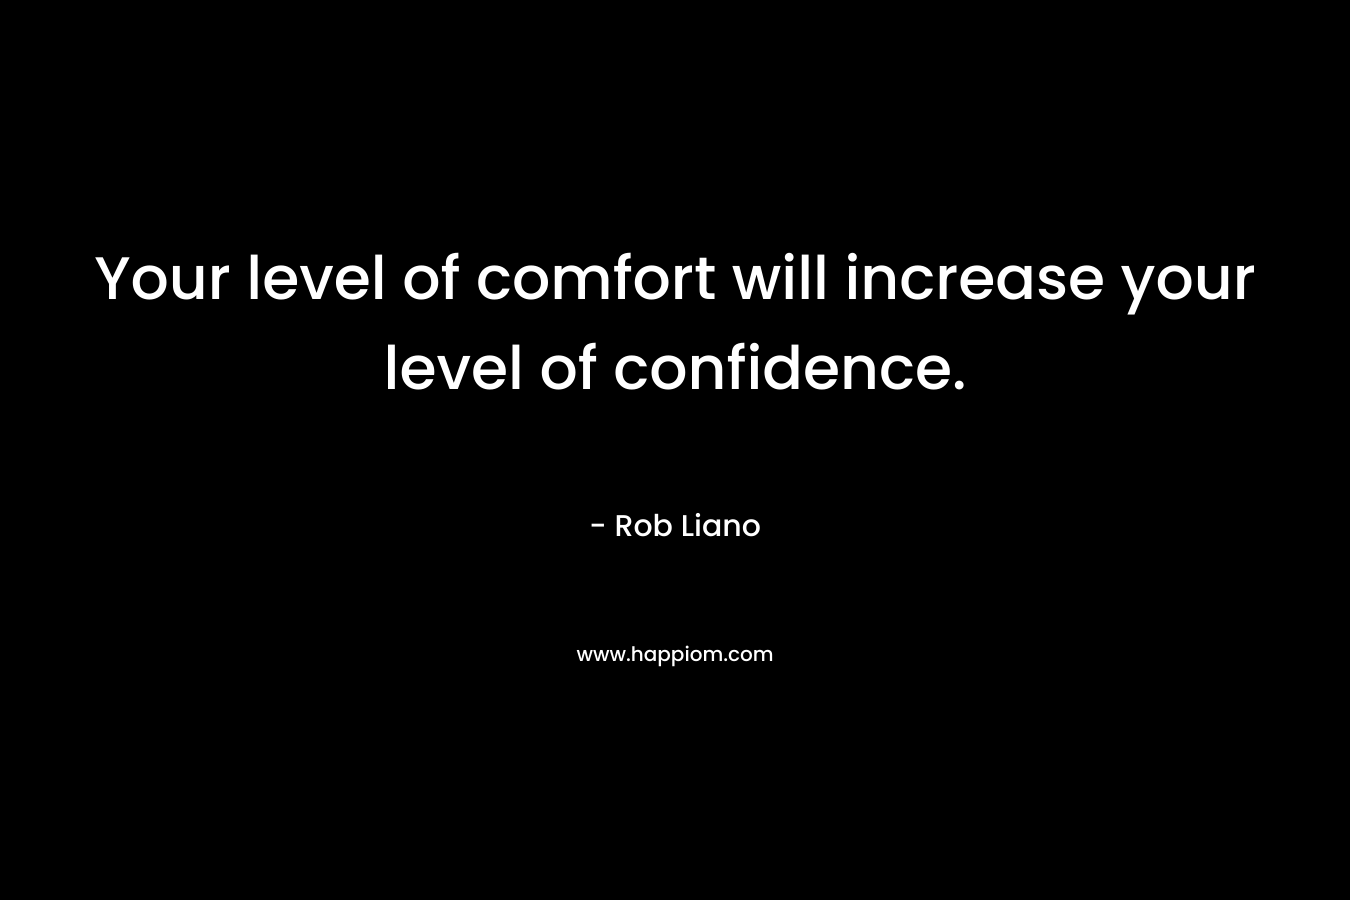 Your level of comfort will increase your level of confidence.